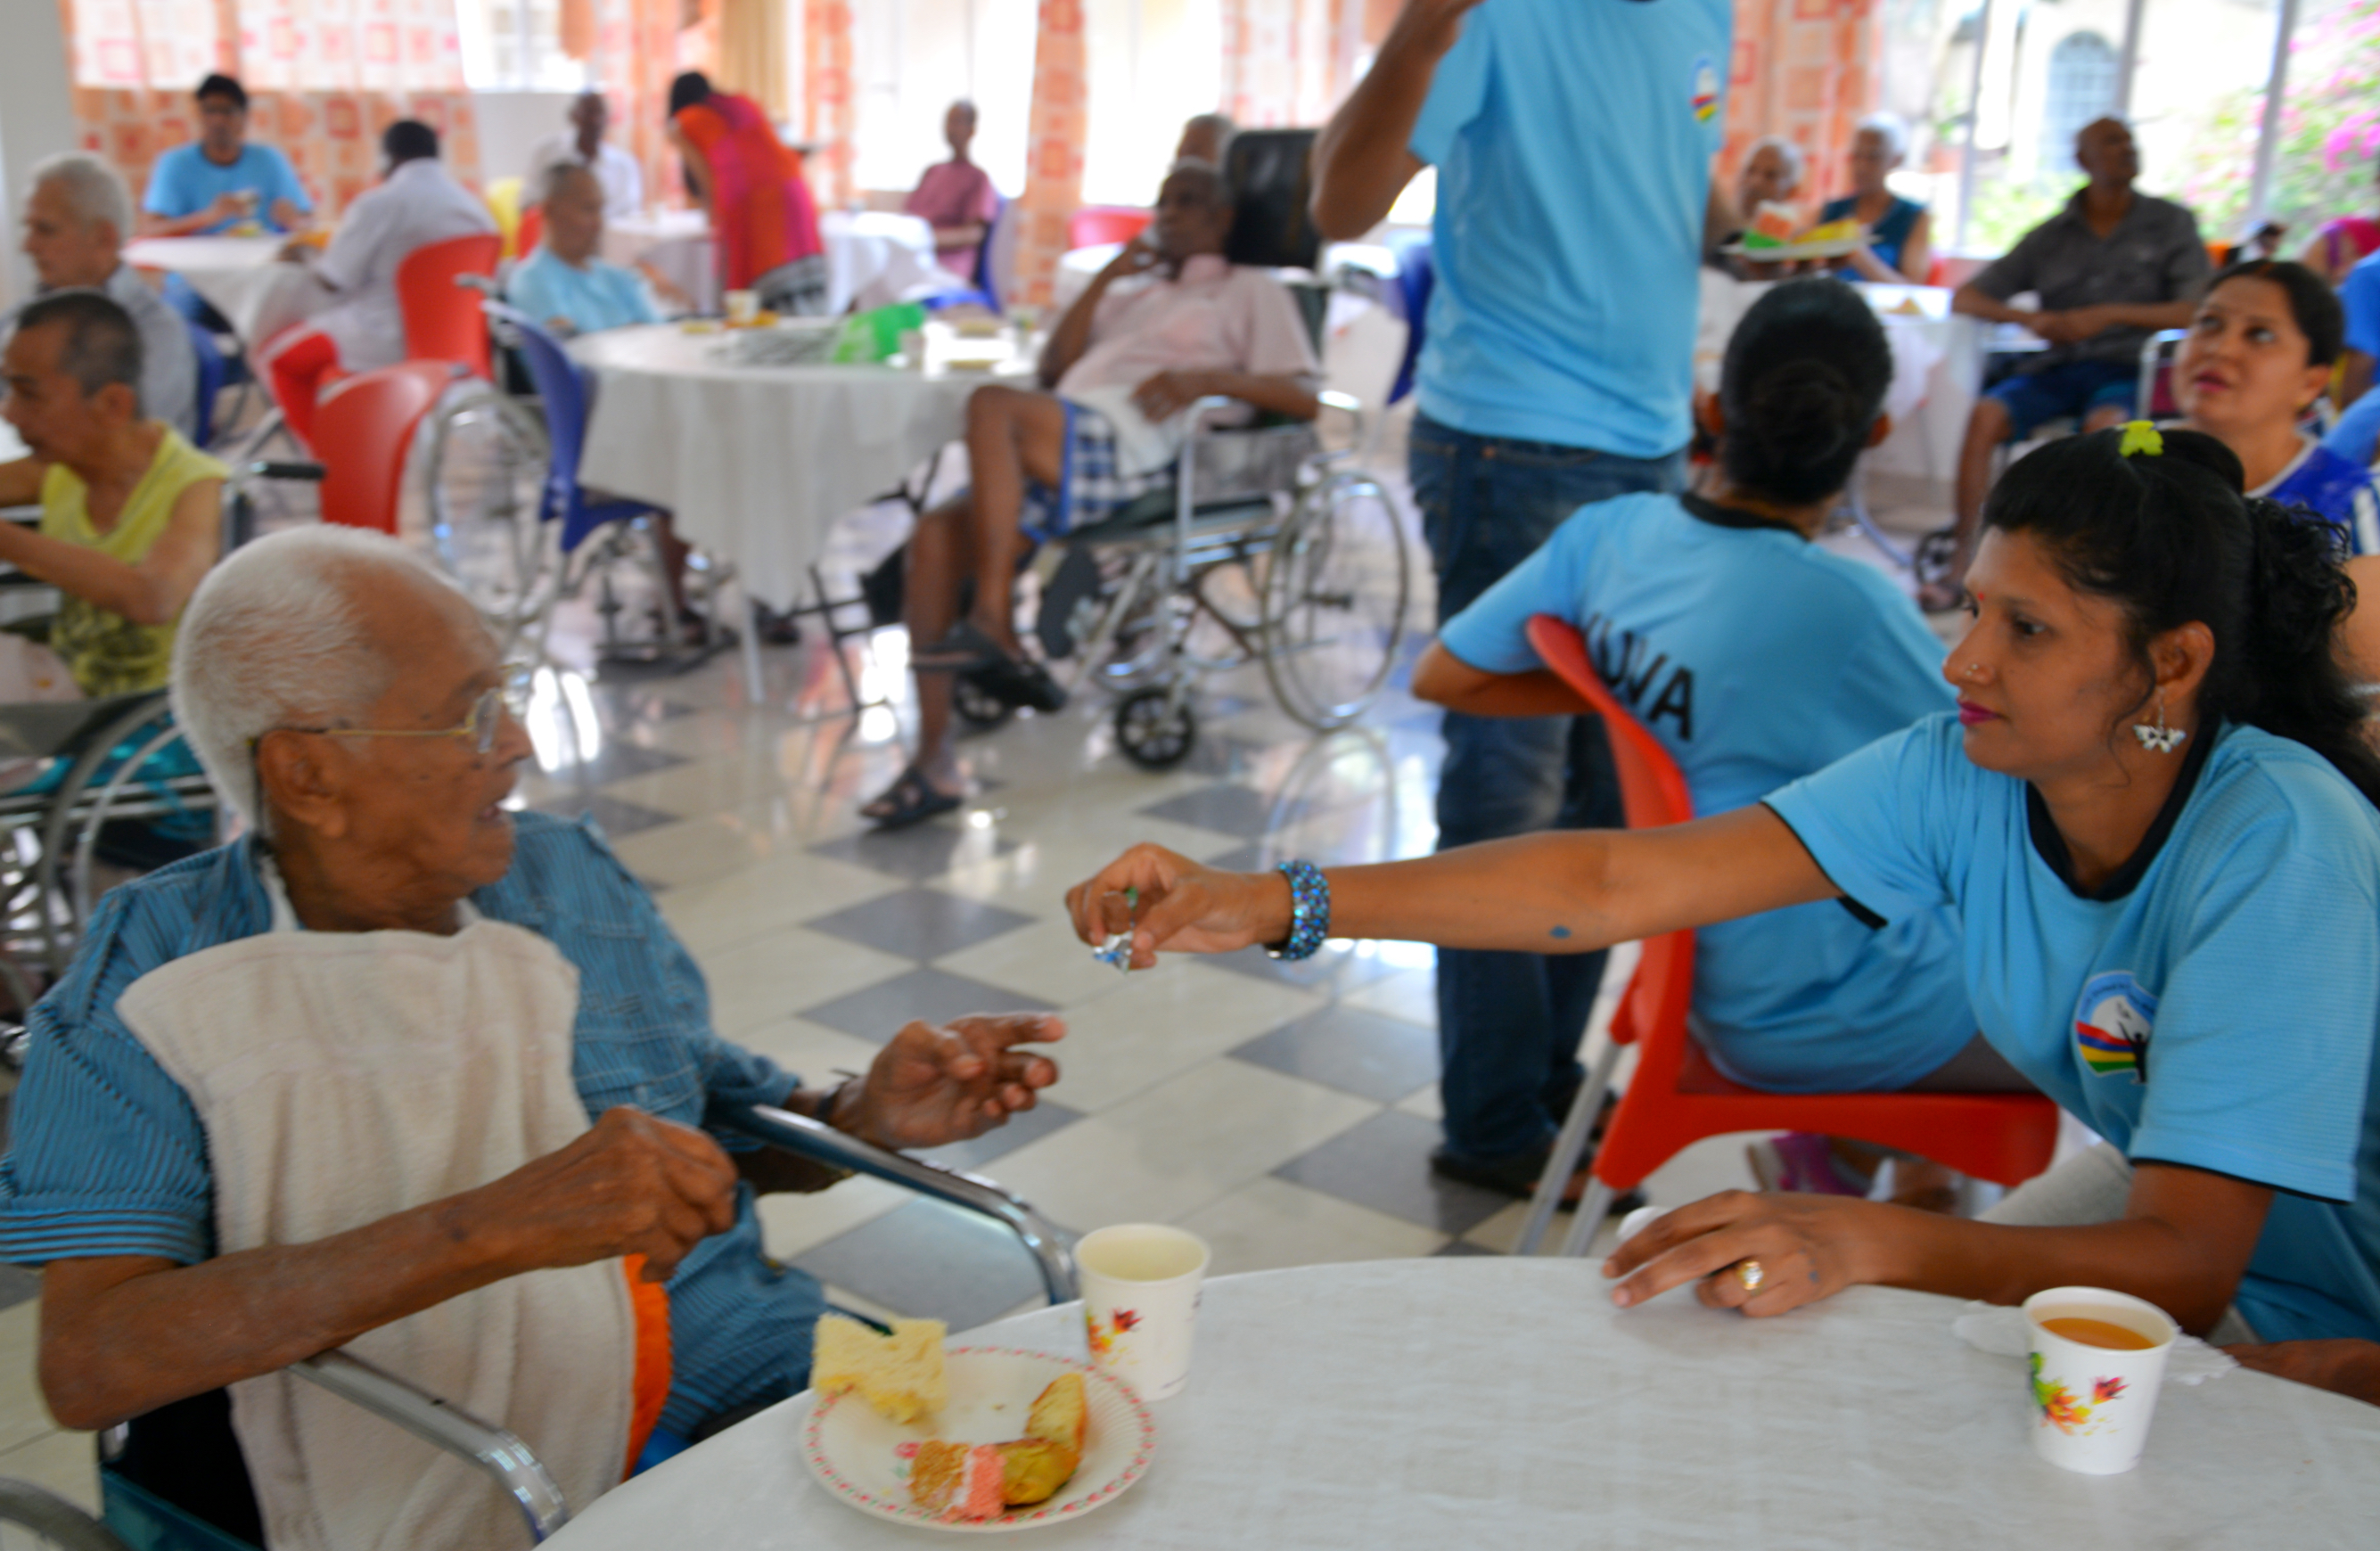 Want to Spend Half-day with 100 Senior Citizens in a Home?